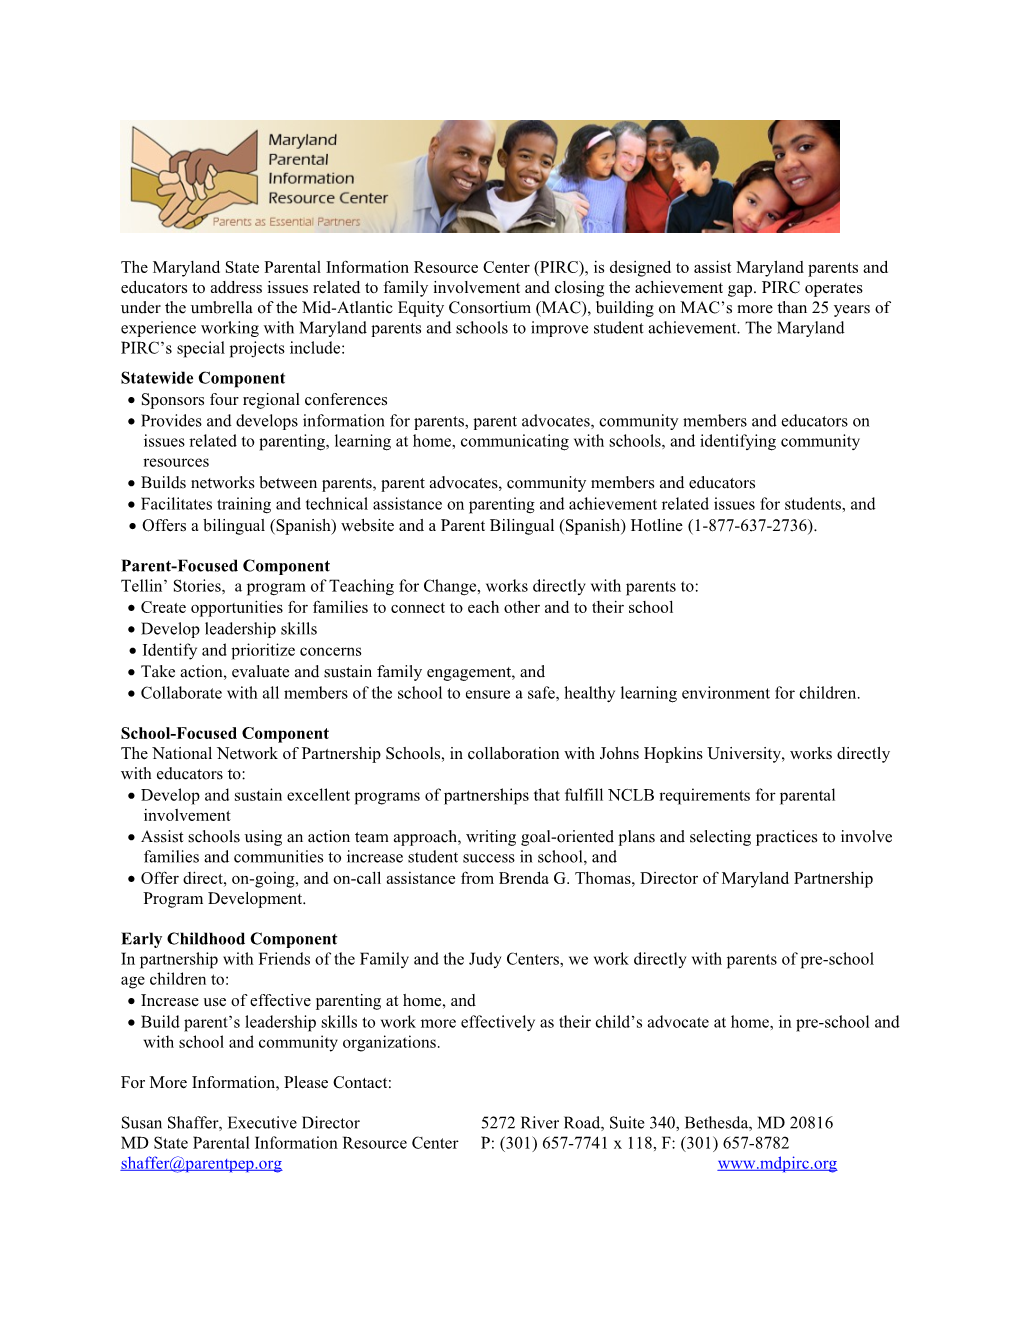 Parents As Essential Partners (PEP), the Maryland Parent Information Resource Center (PIRC)